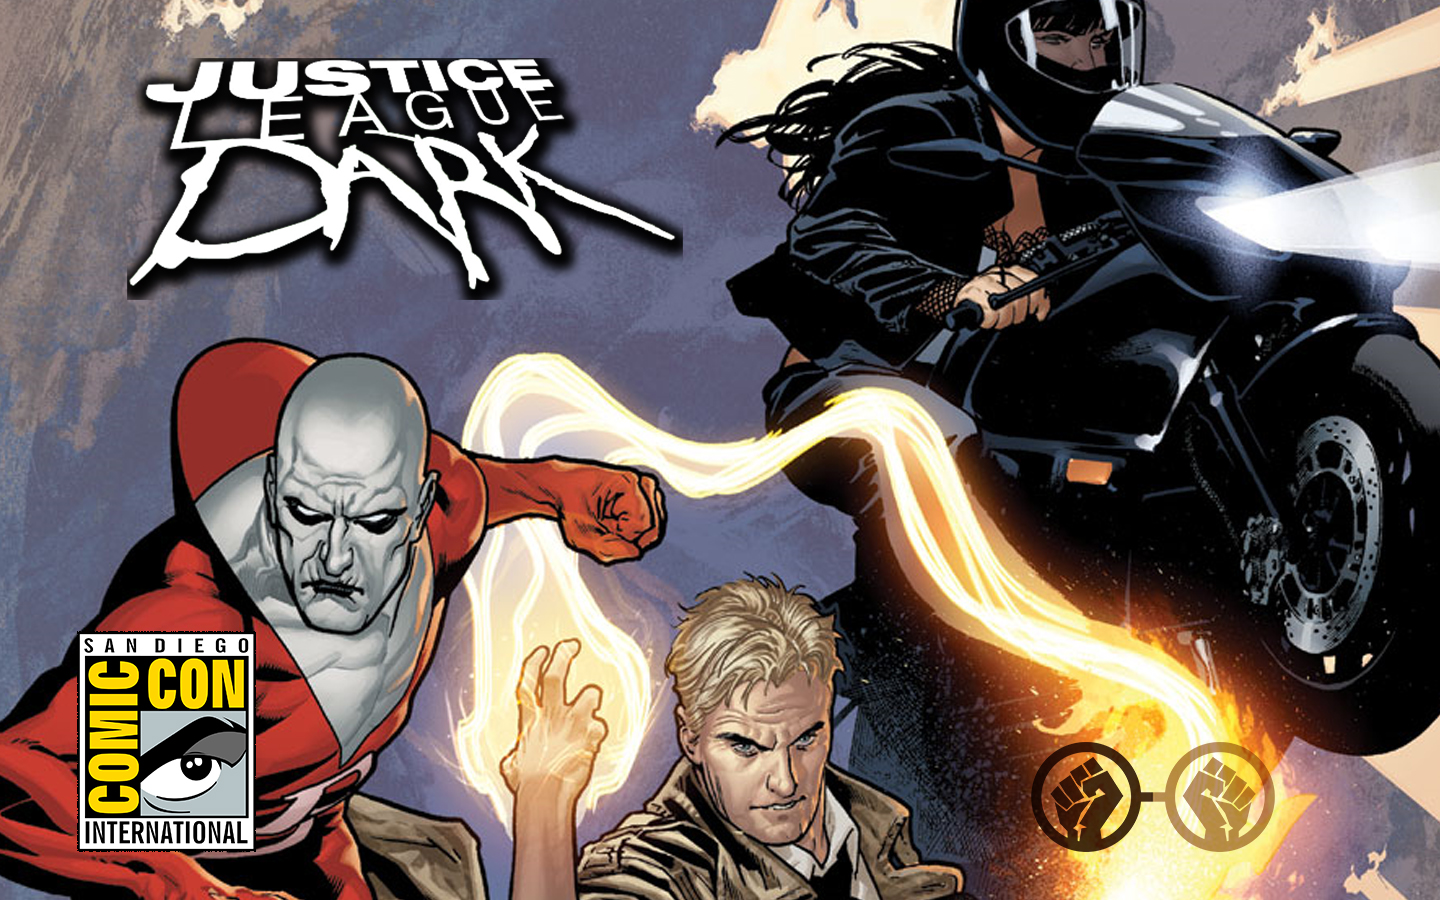 ‘Justice League Dark’ Among The Movies Warner Bros. Has in Their DCEU Slate #SDCC2017